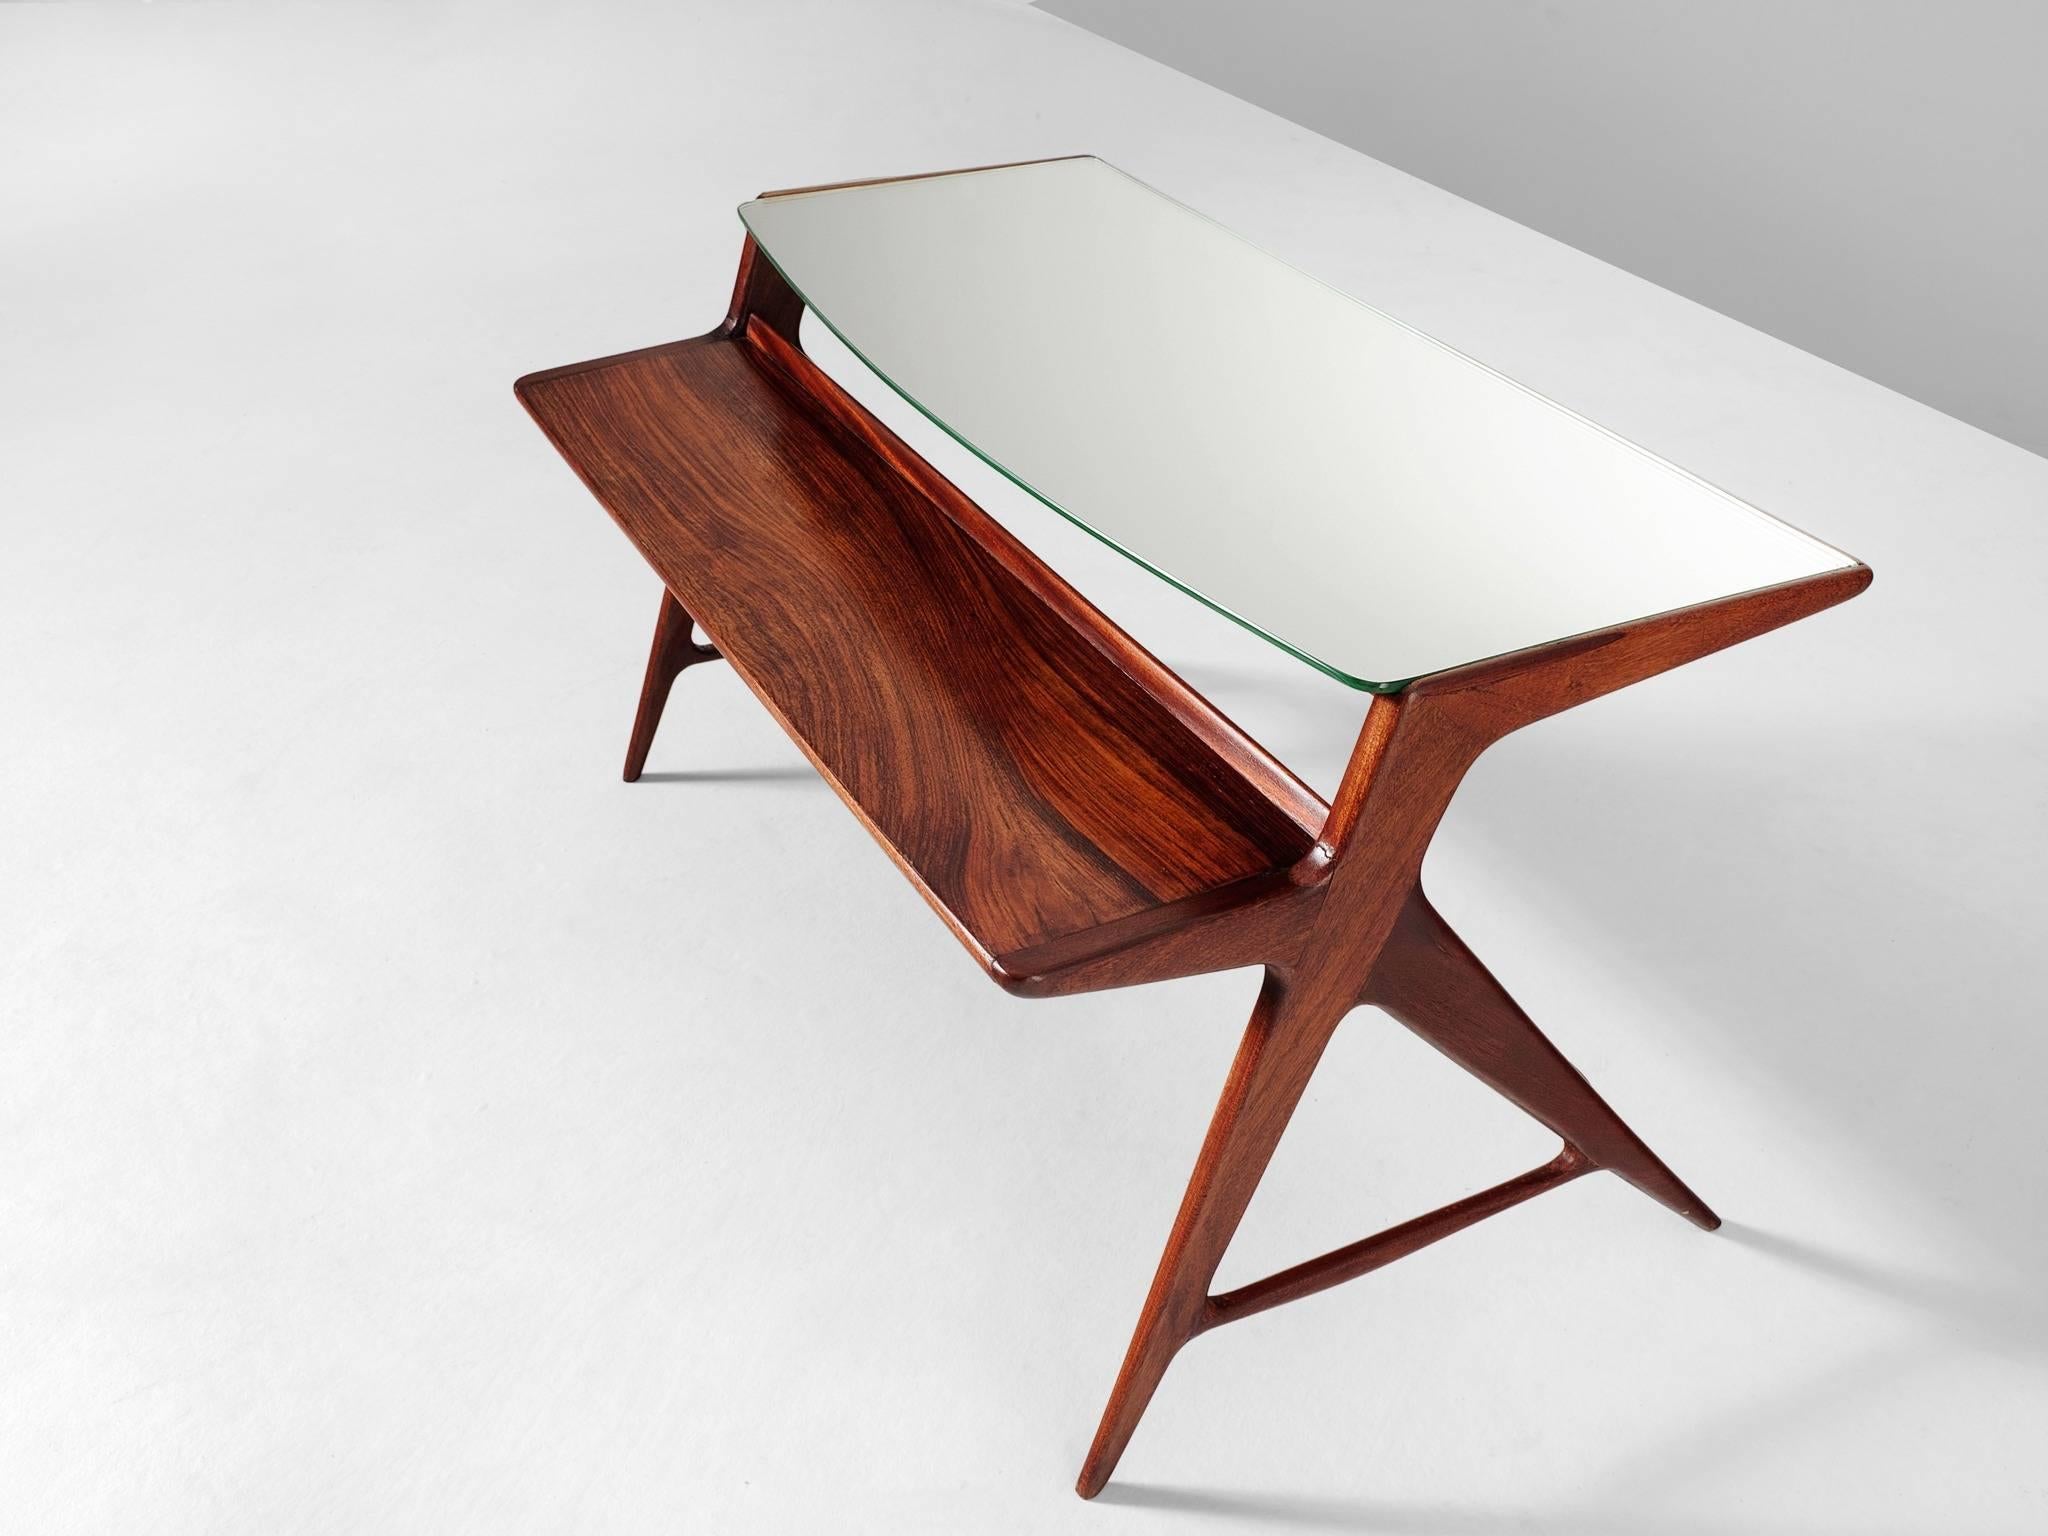 Cocktail table, in rosewood and glass, Italian, 1950s. 

Elegant side-table with mirrored top. The rosewood frame shows beautiful lines, especially seen in the tapered and crossed legs. The top consists of two rectangular plates, both on a different